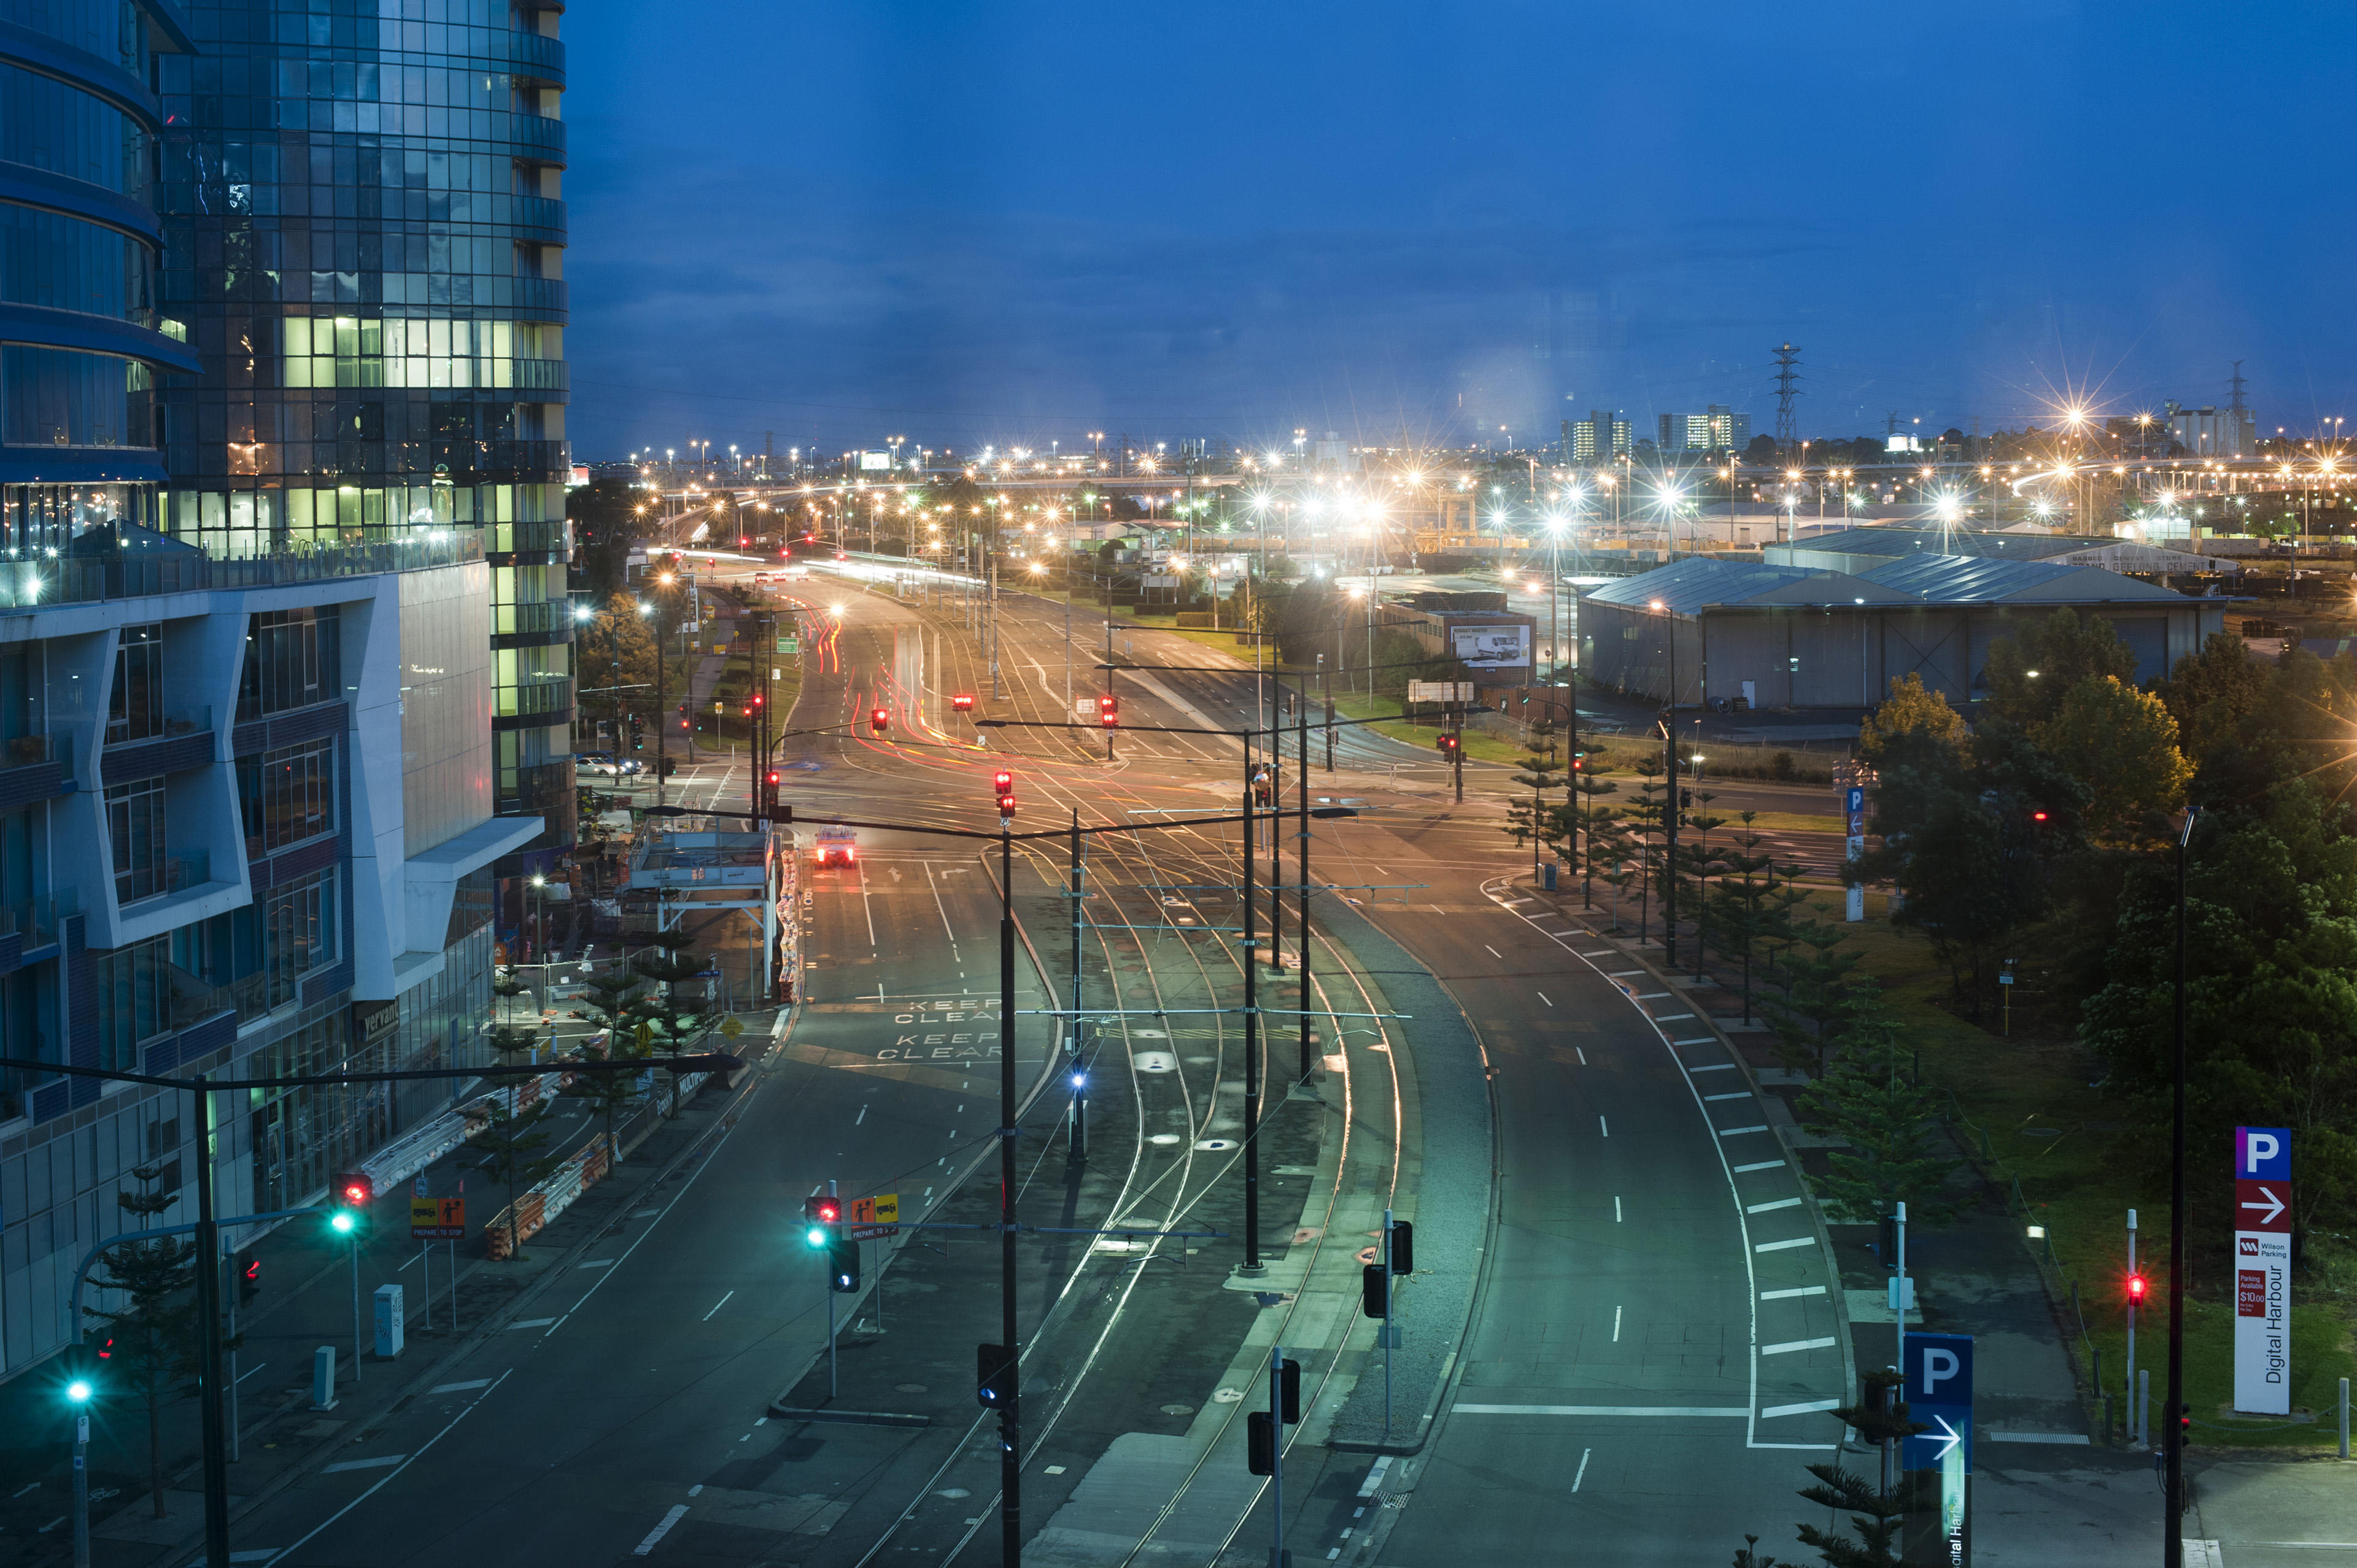 Image of Overview of Empty City Street at Dusk | Freebie.Photography